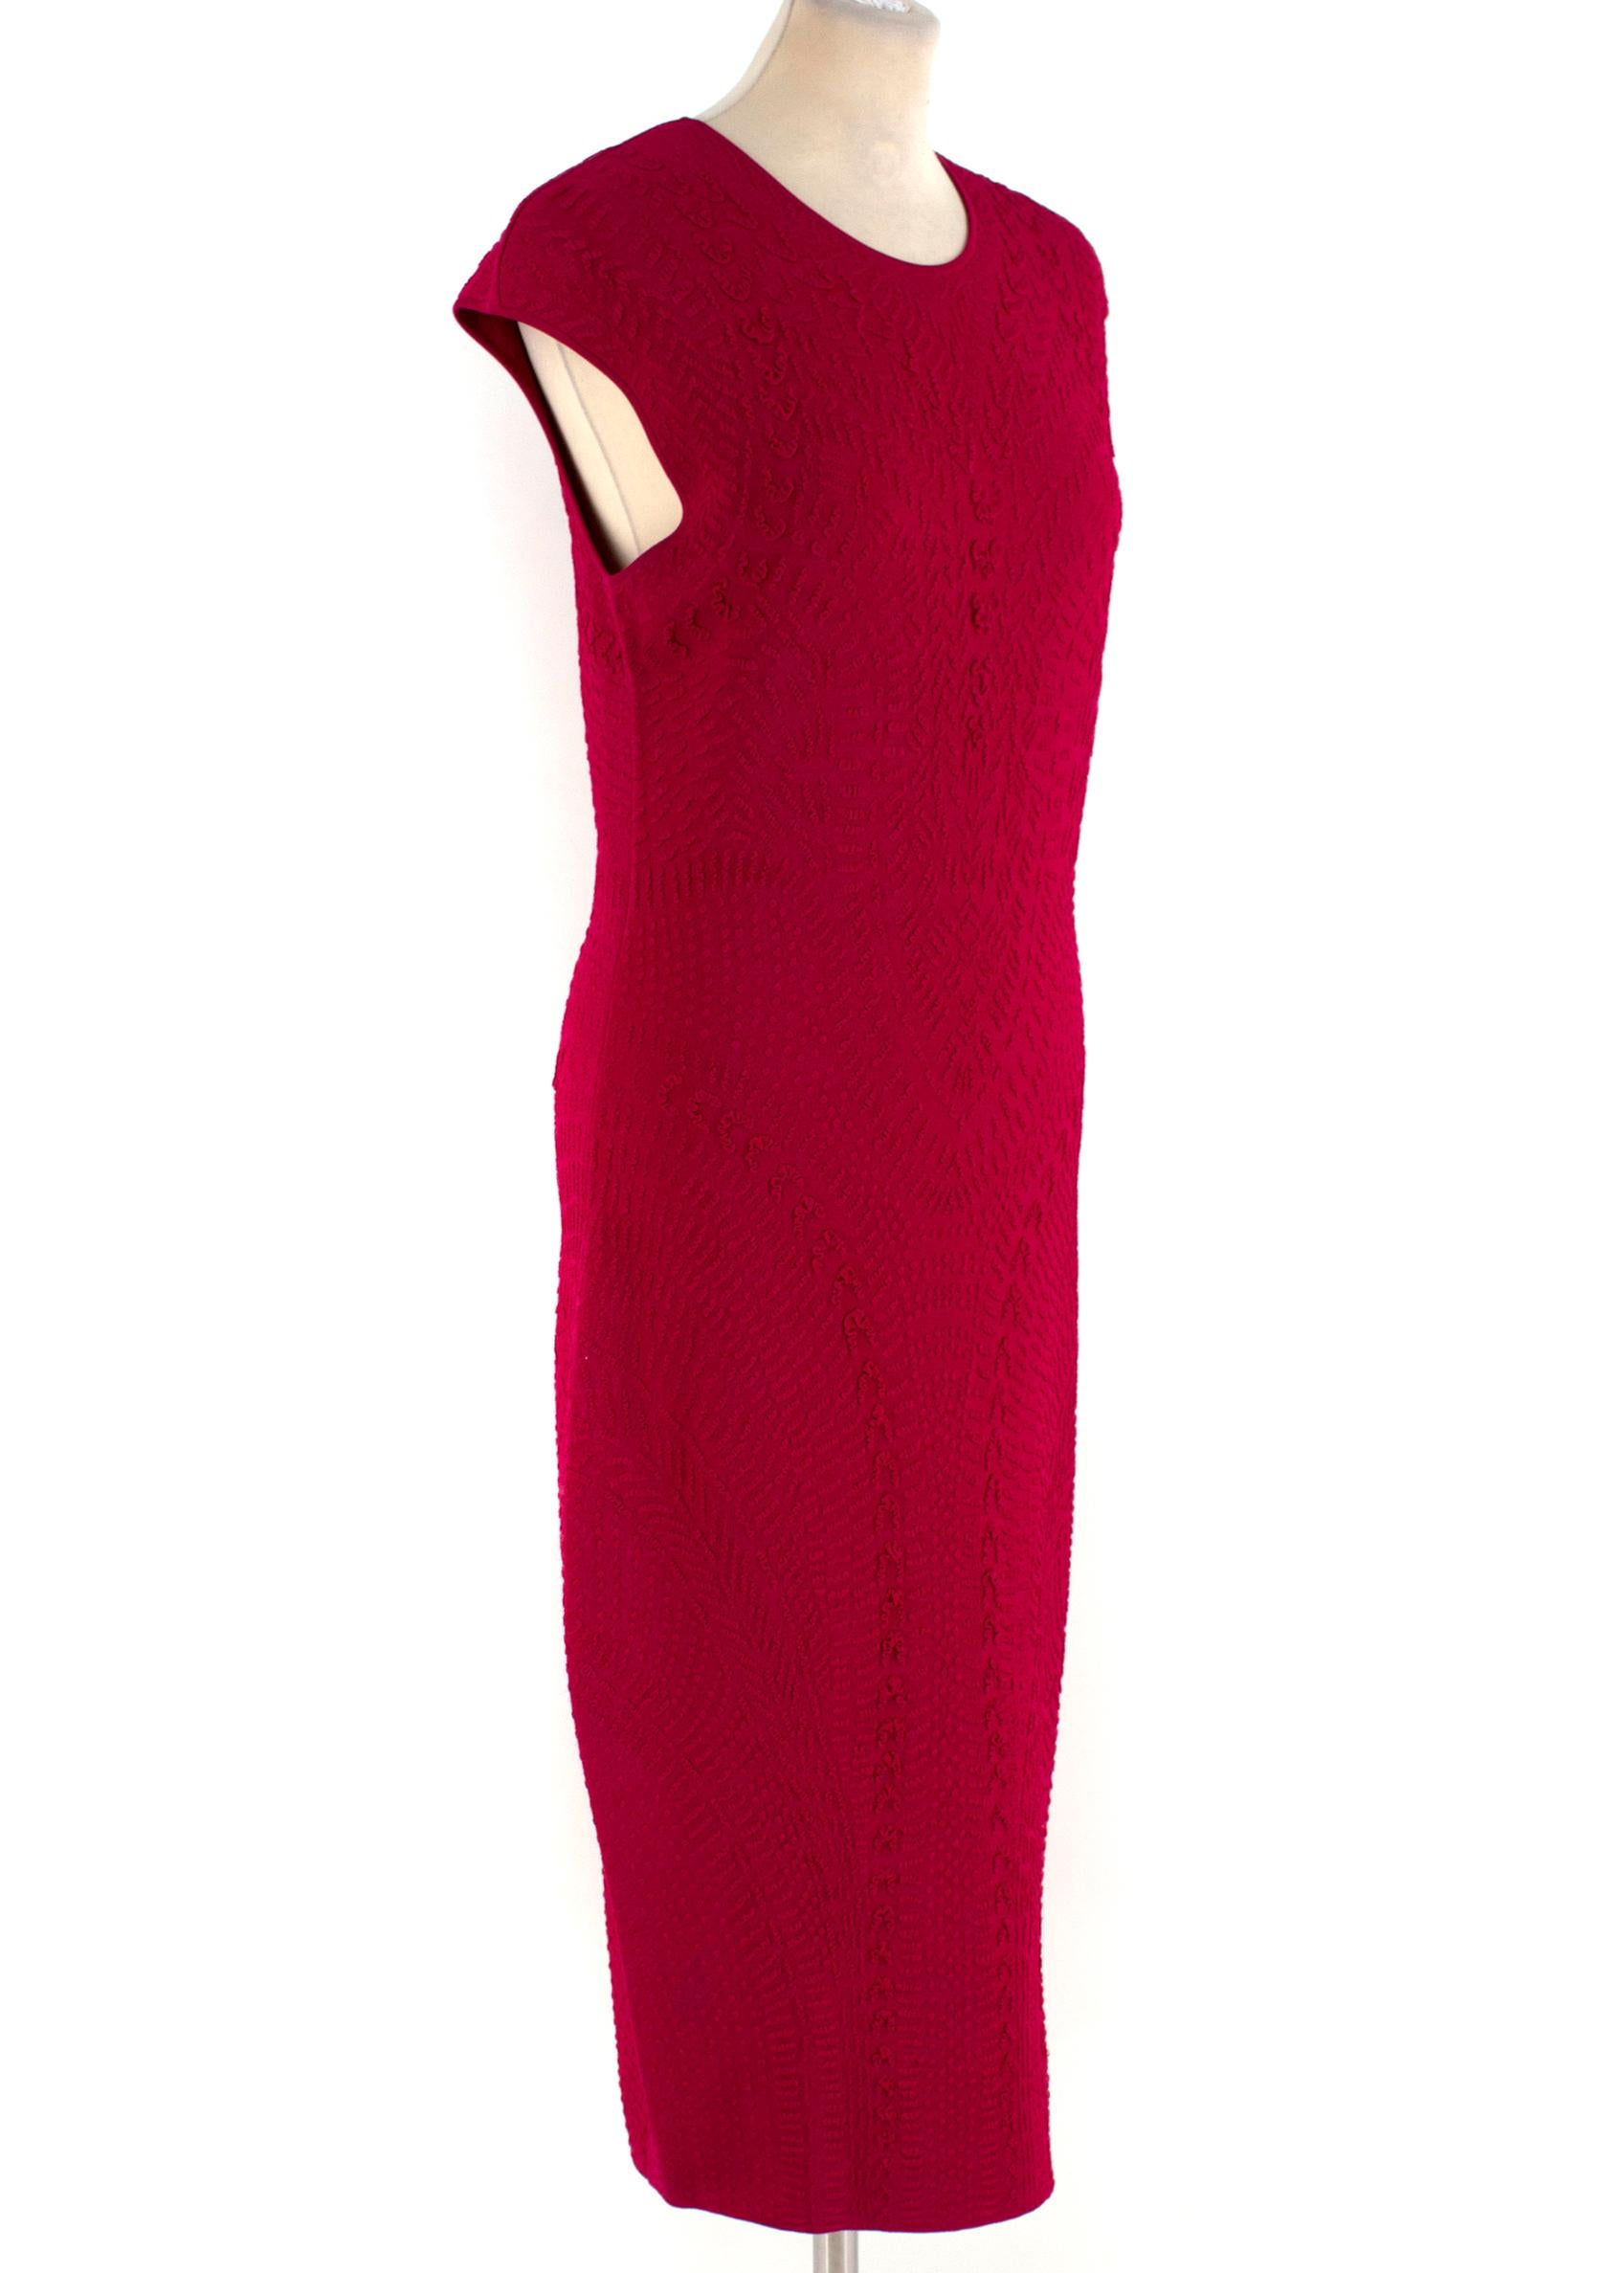 Alexander McQueen red matelasse-knit dress

- Crimson-red, heavyweight ornate matelasse knit 
- Round neck, capped sleeves 
- Slip on

Please note, these items are pre-owned and may show some signs of storage, even when unworn and unused. This is